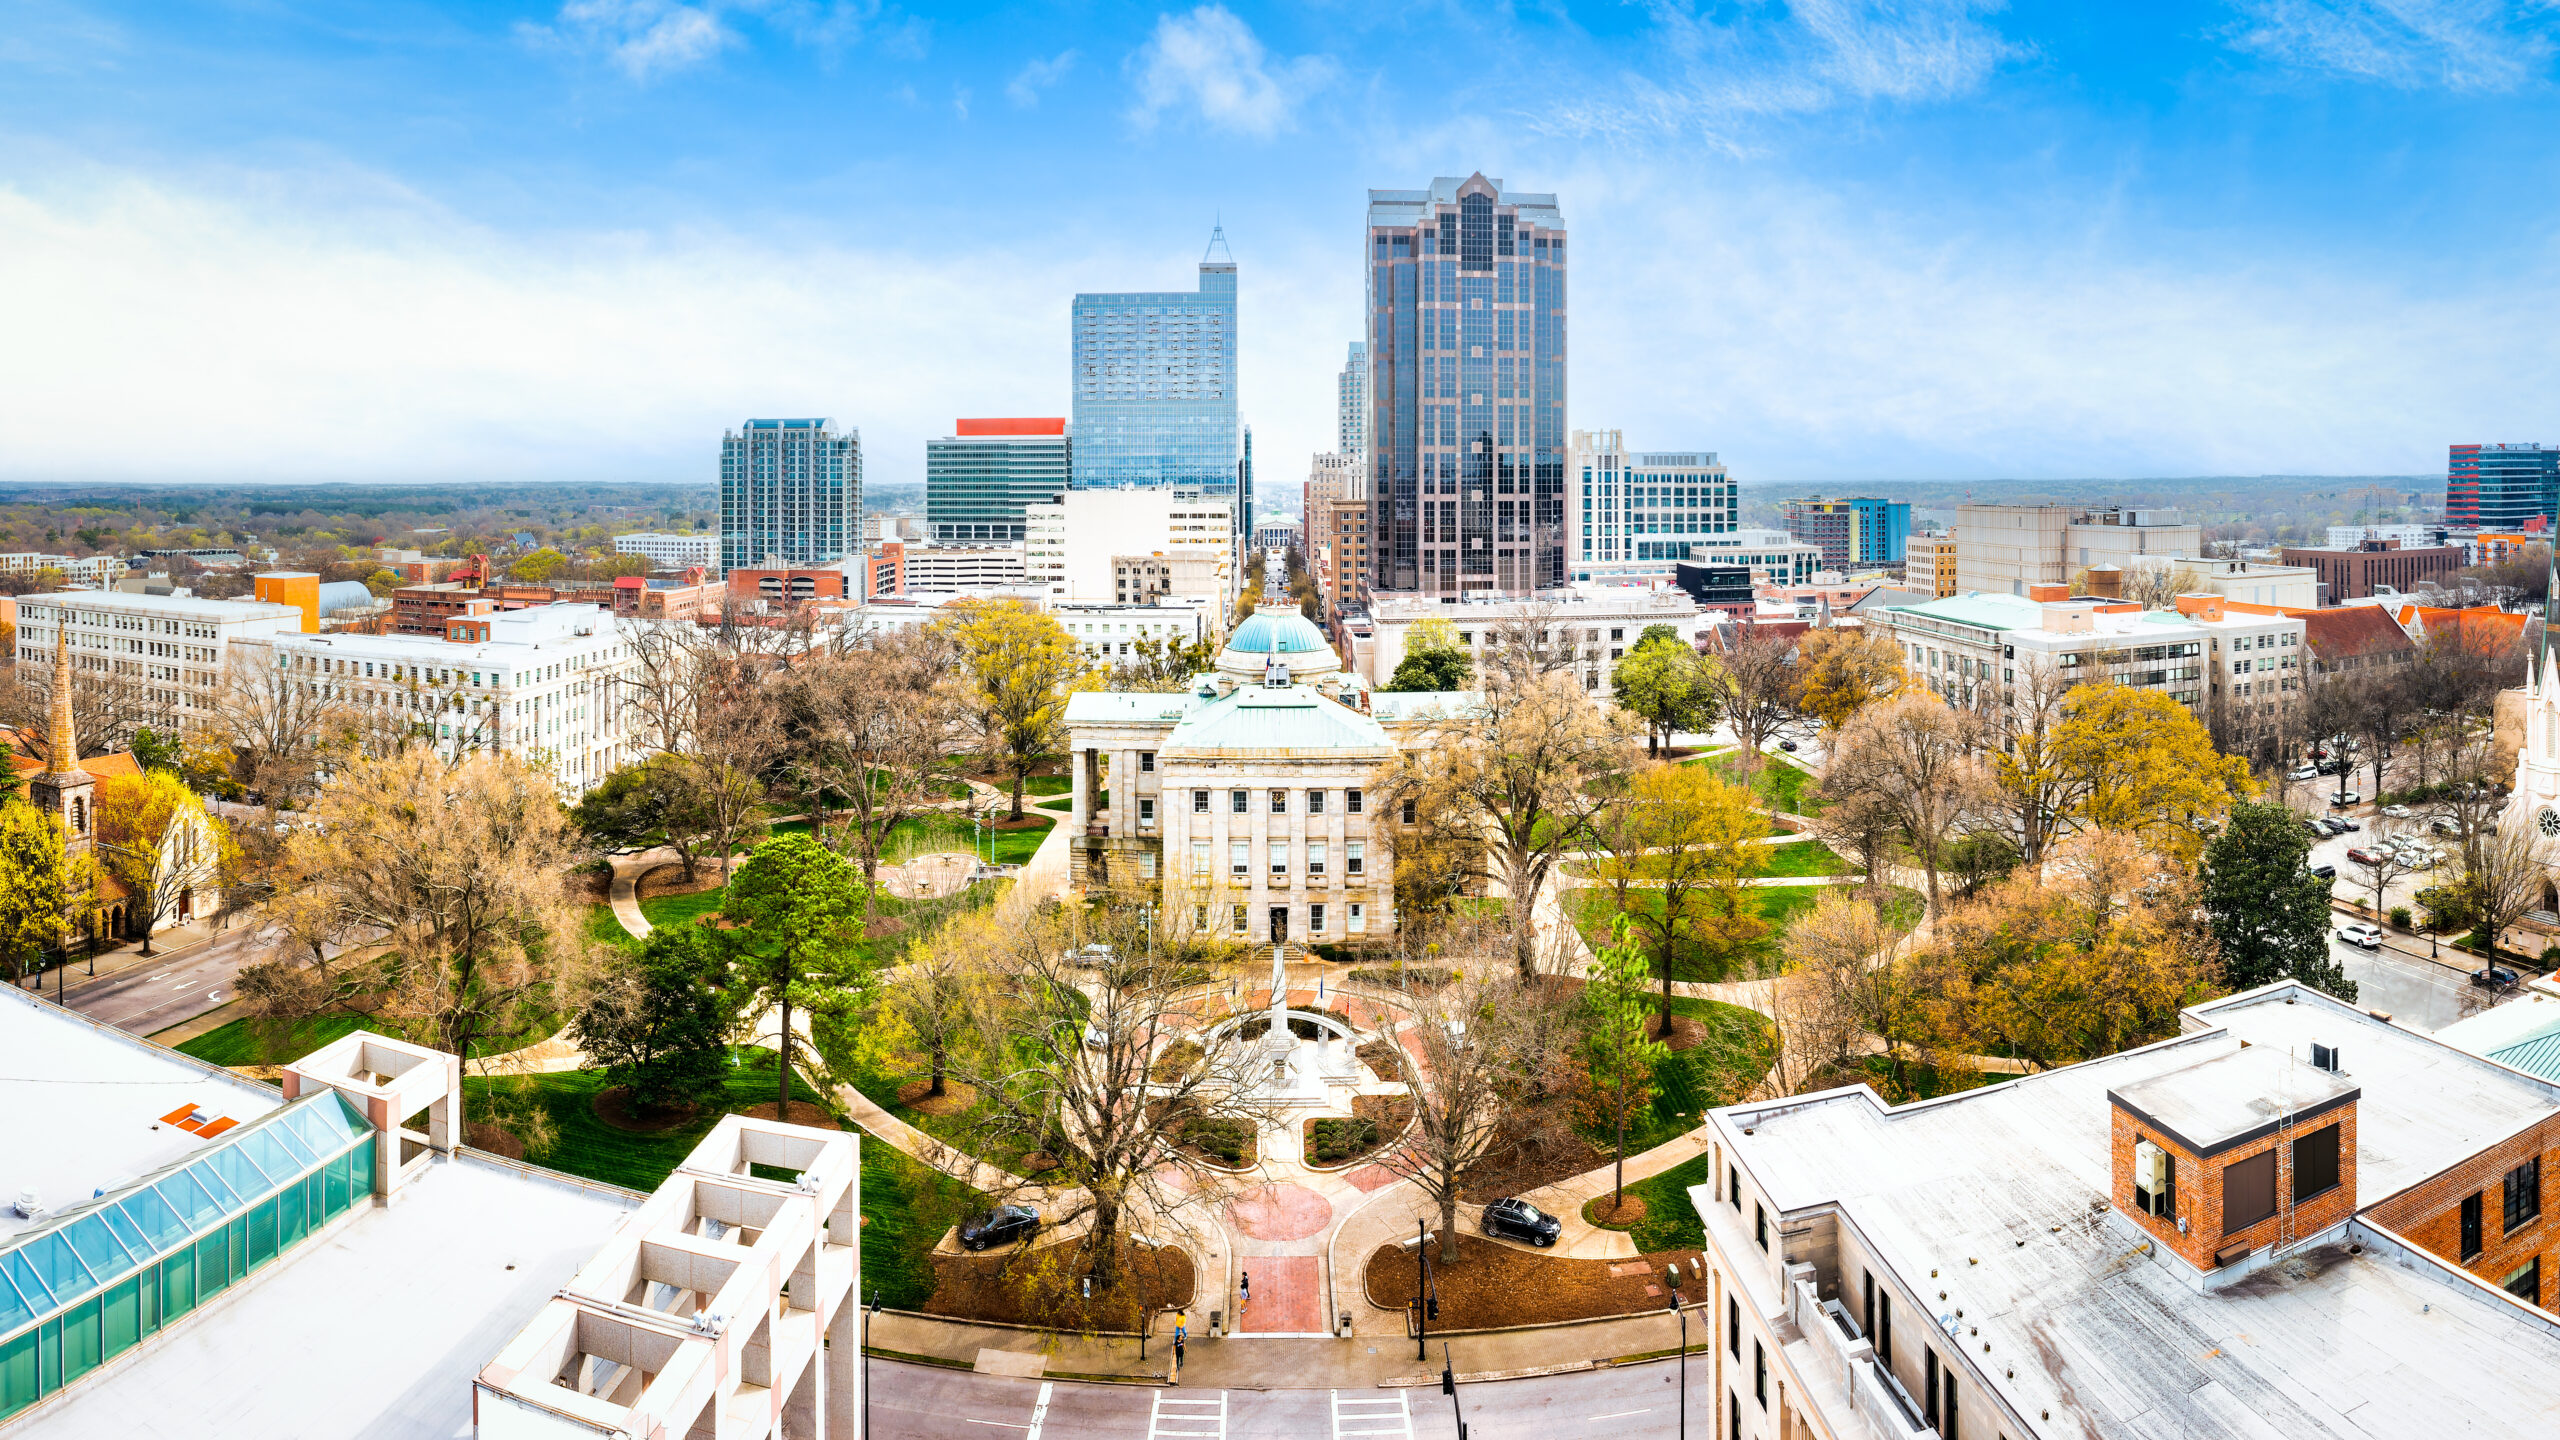 Skyline of North Carolina State Capitol and Raleigh downtown.